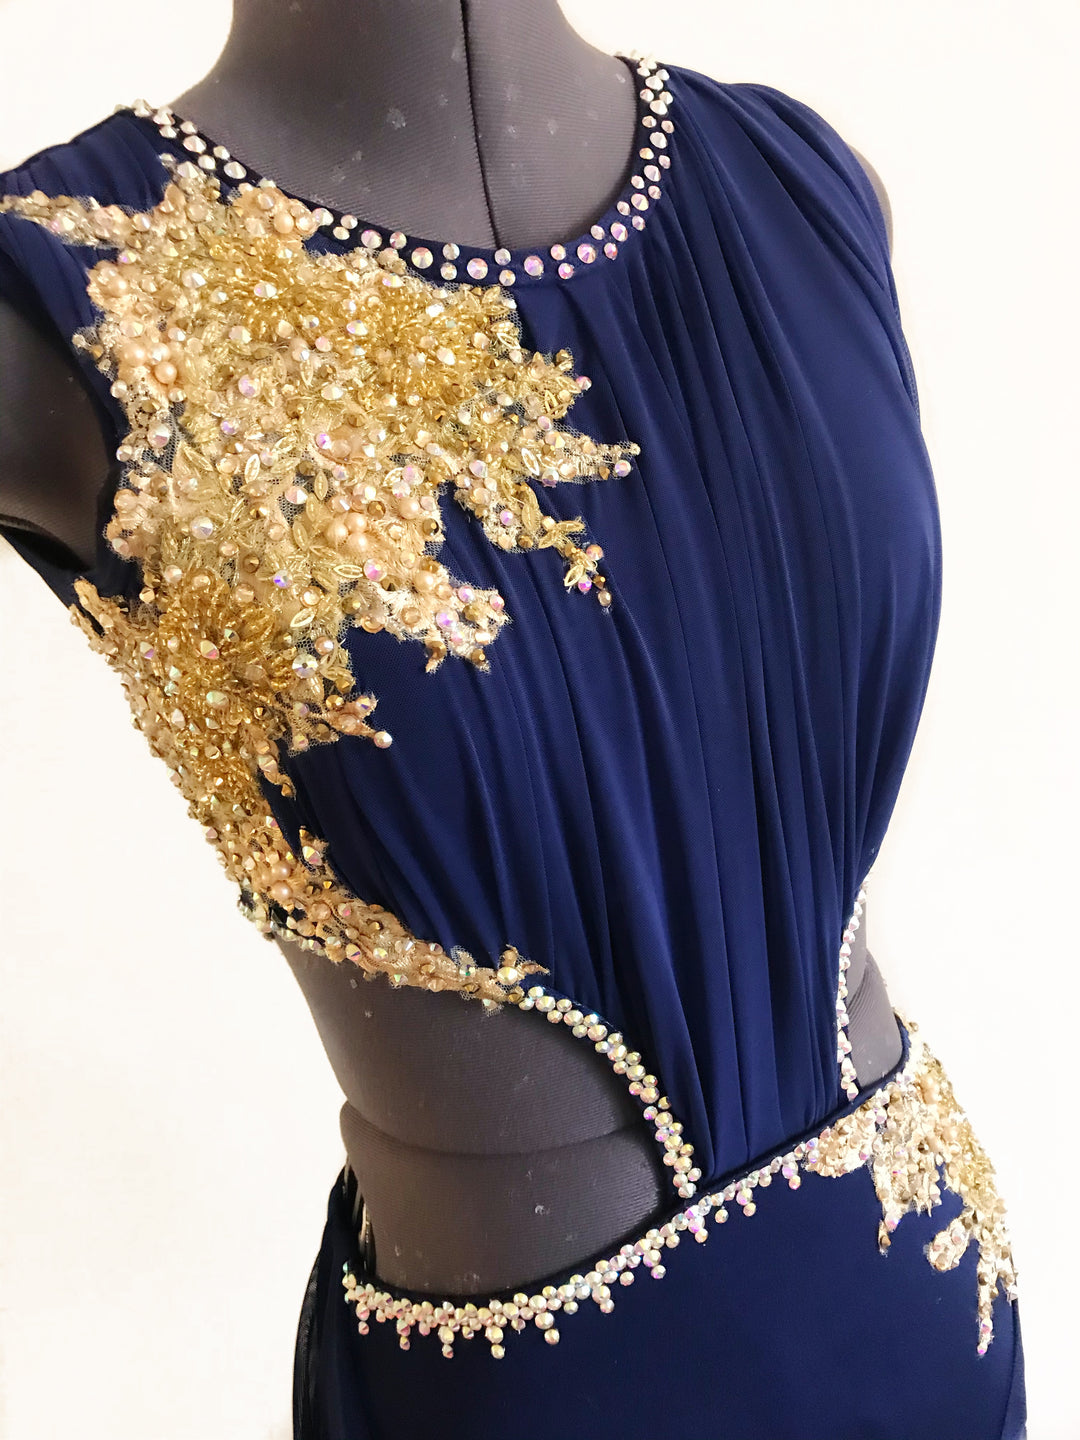 ADULT SMALL navy/gold lyrical/contemporary ready-to-ship dance costume